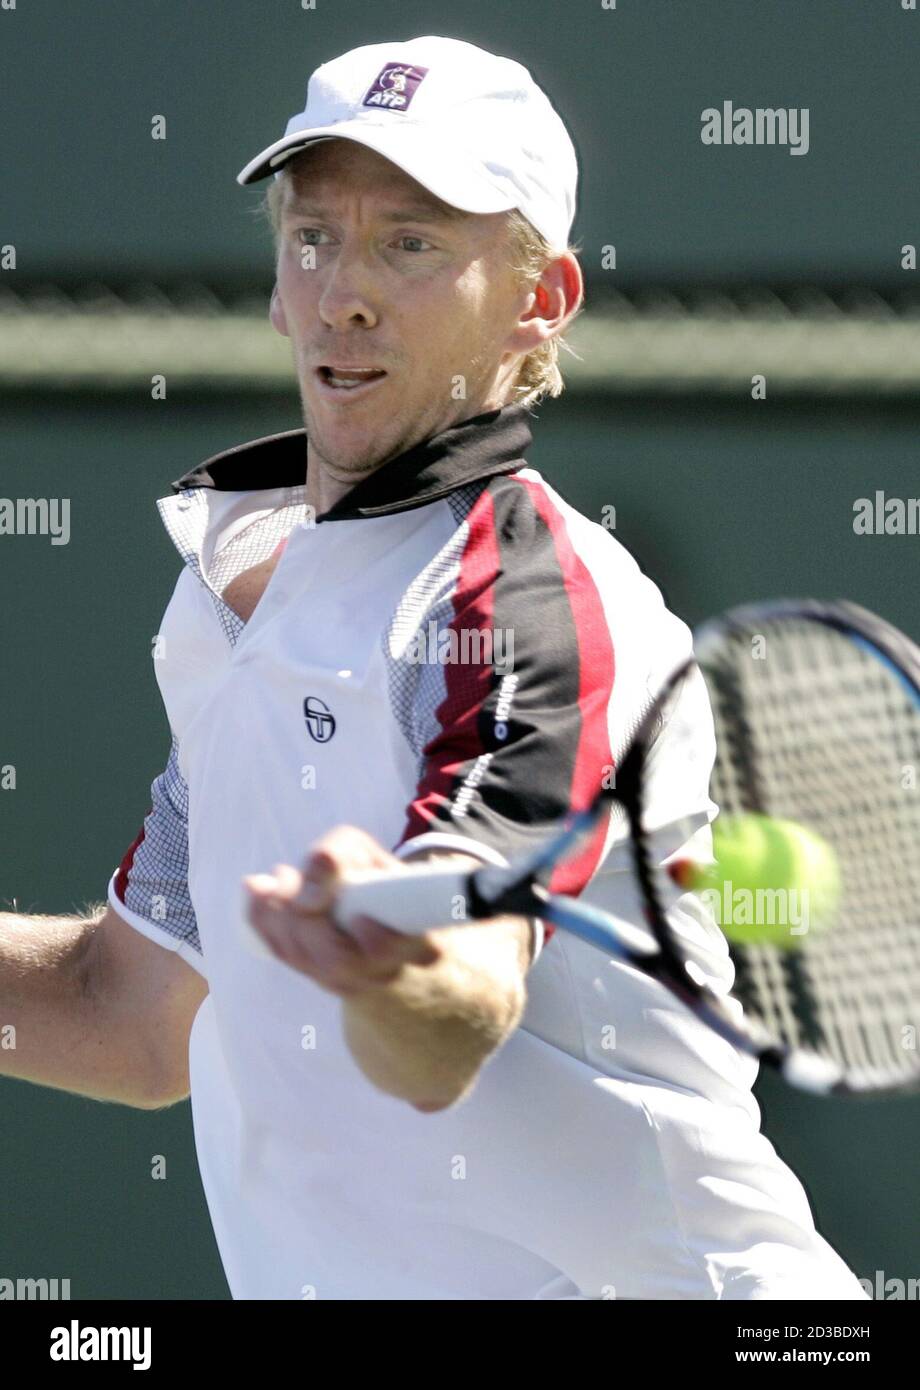 Wayne Arthurs of Australia returns a backhand during his qualifying match against Juan Pablo Brzezicki of Argentina at the Pacific Life Open in Indian Wells, California, March 9, 2005. REUTERS/Robert Galbraith  RG Stock Photo